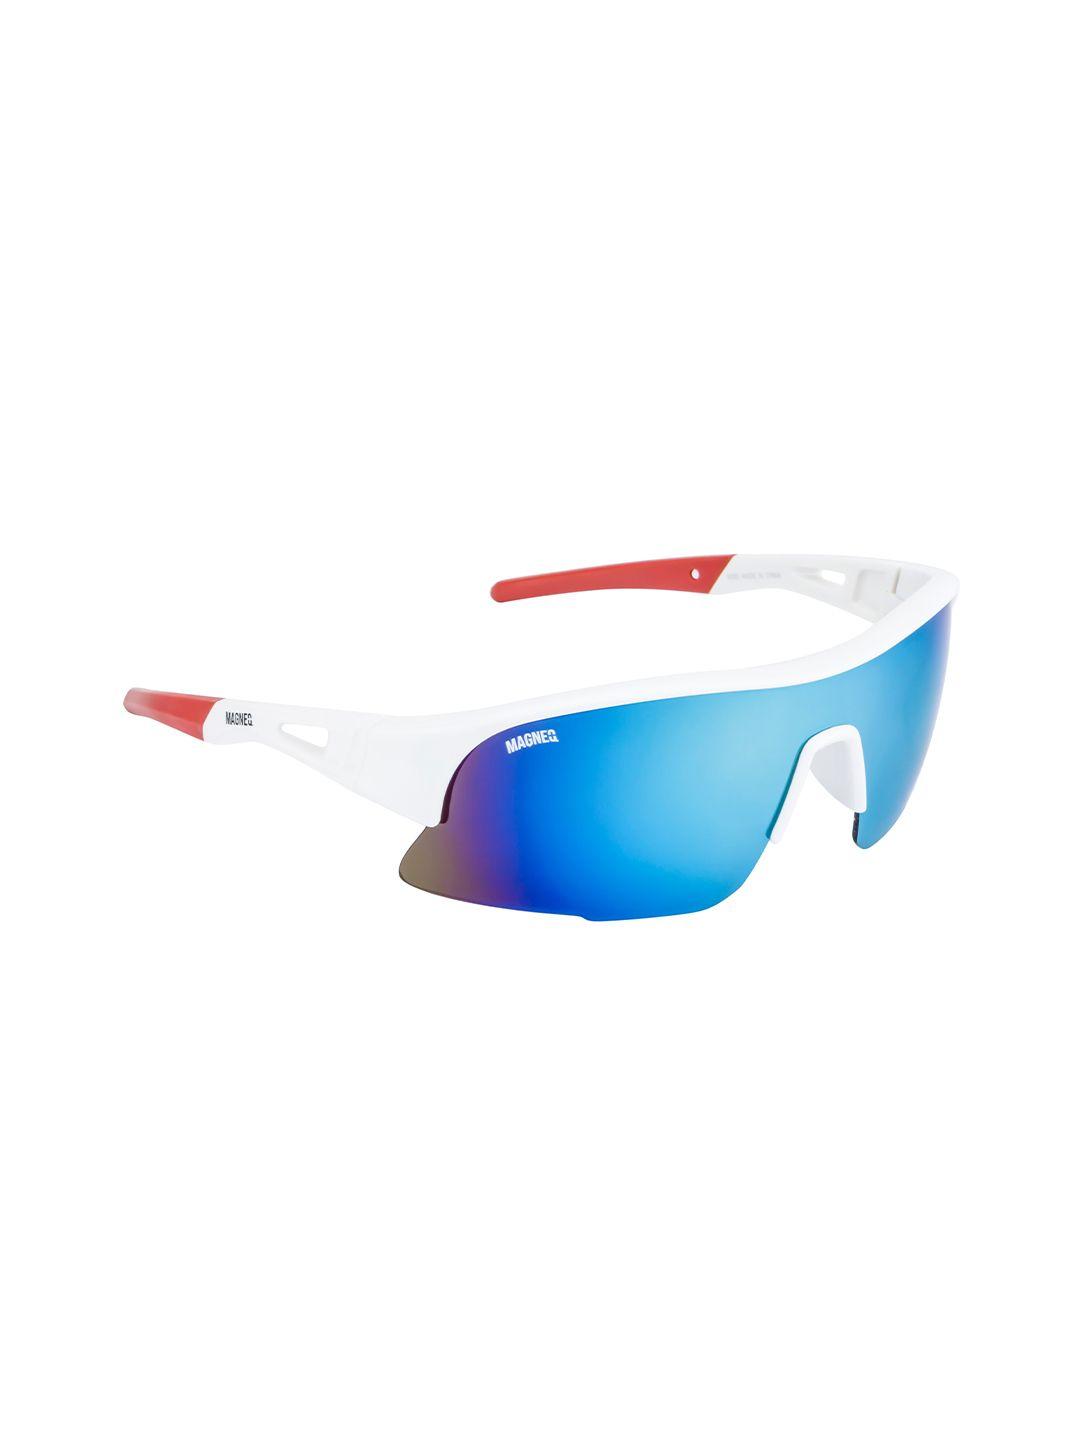 magneq unisex blue lens & white sports sunglasses with uv protected lens